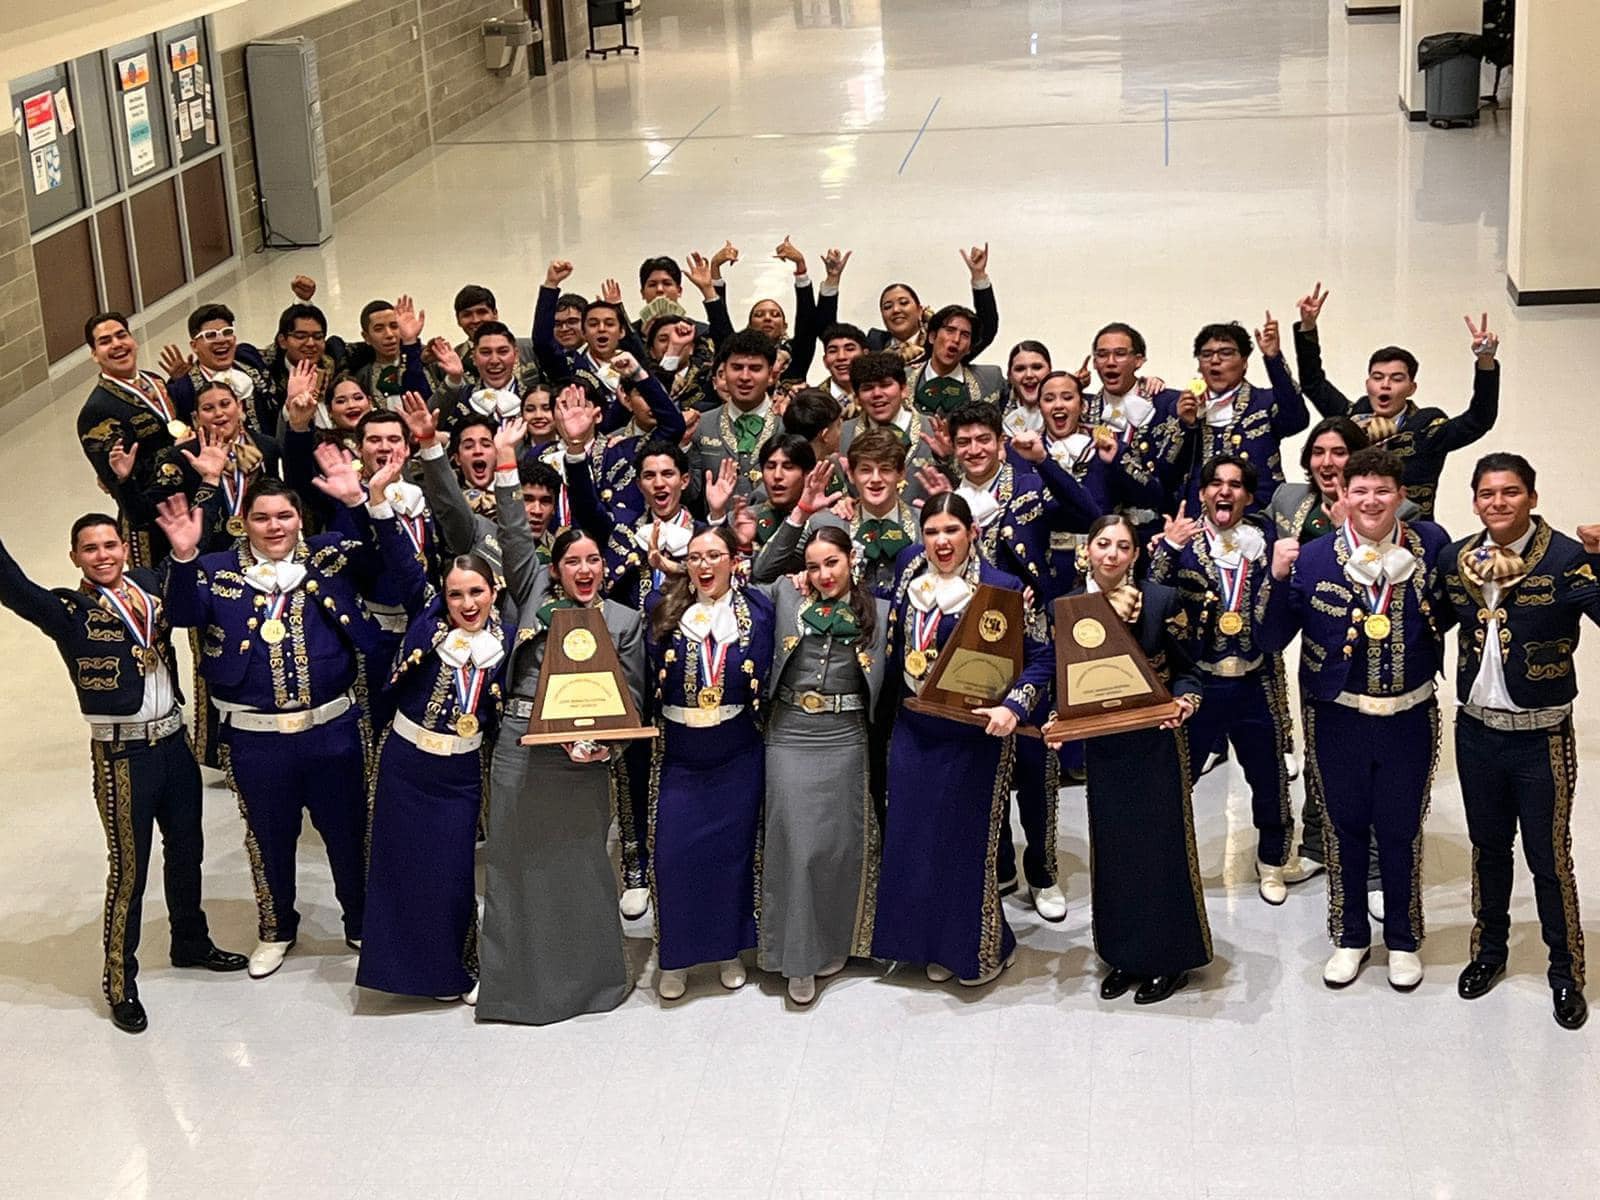 McAllen ISD High School Mariachi earned the overall distinction of a Division 1